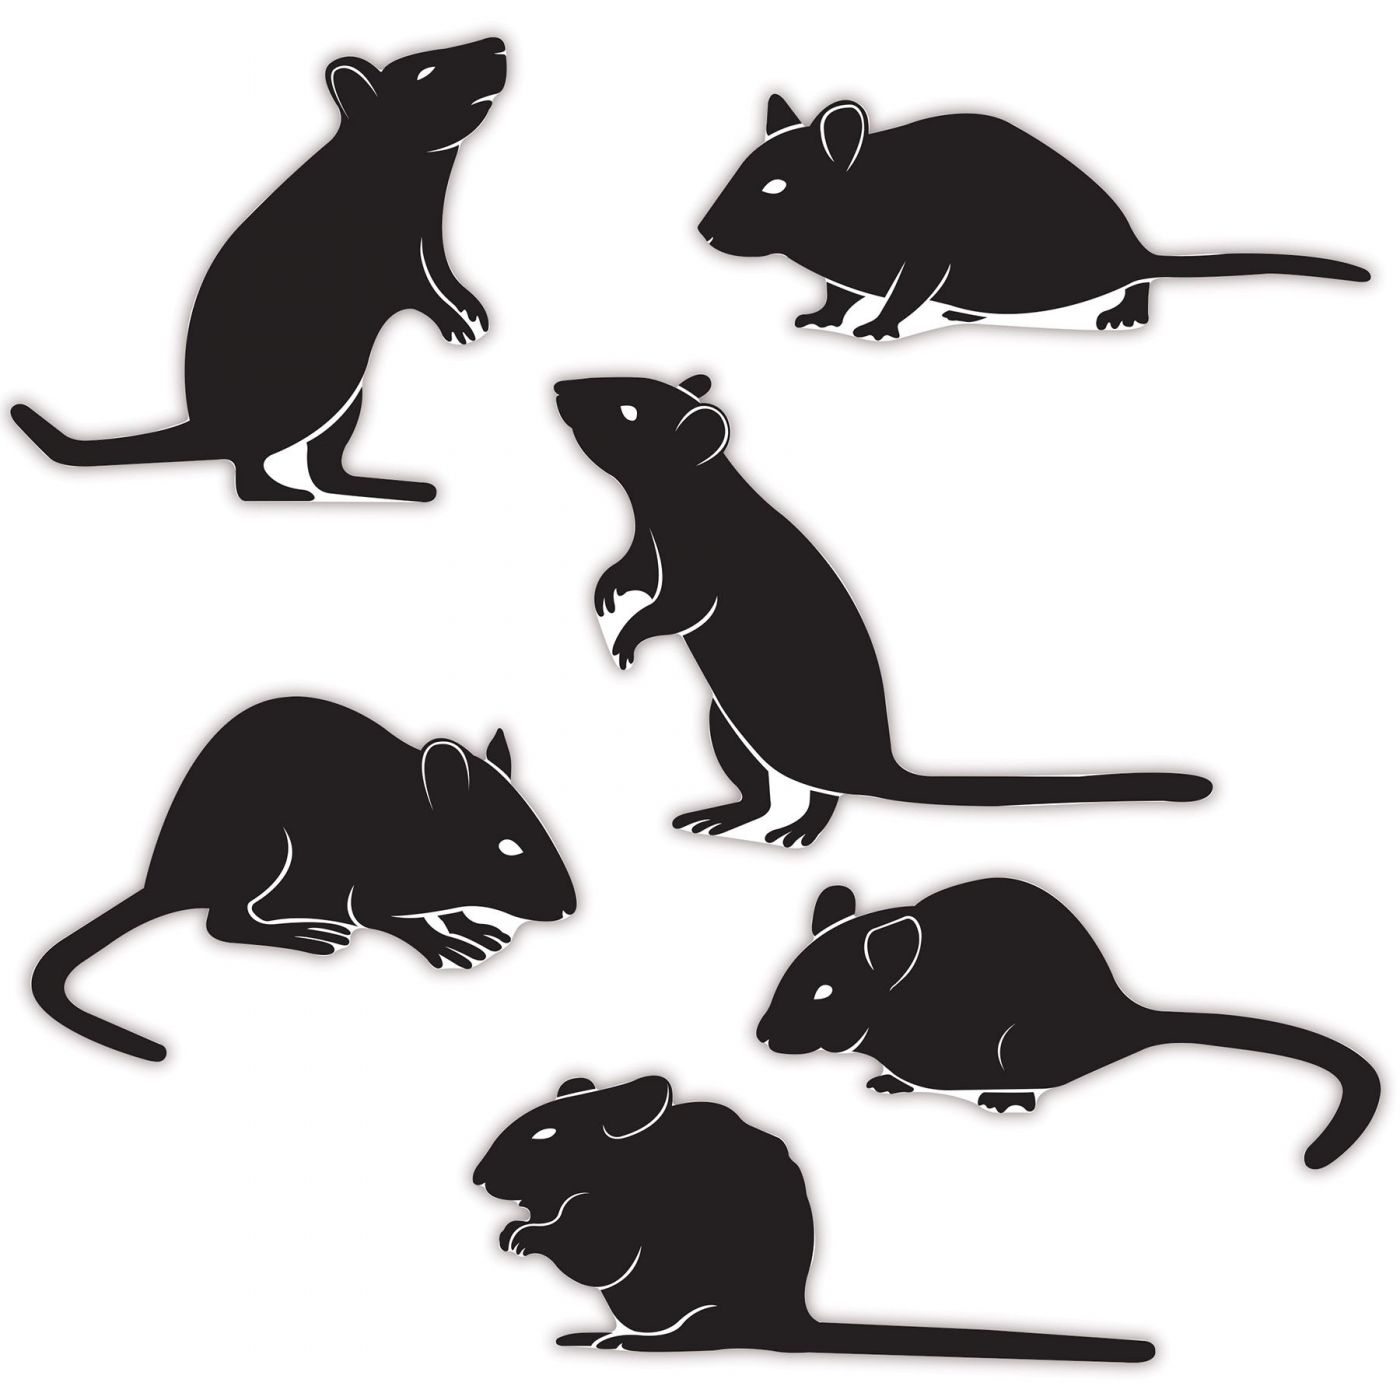 Mice Silhouettes (12) image